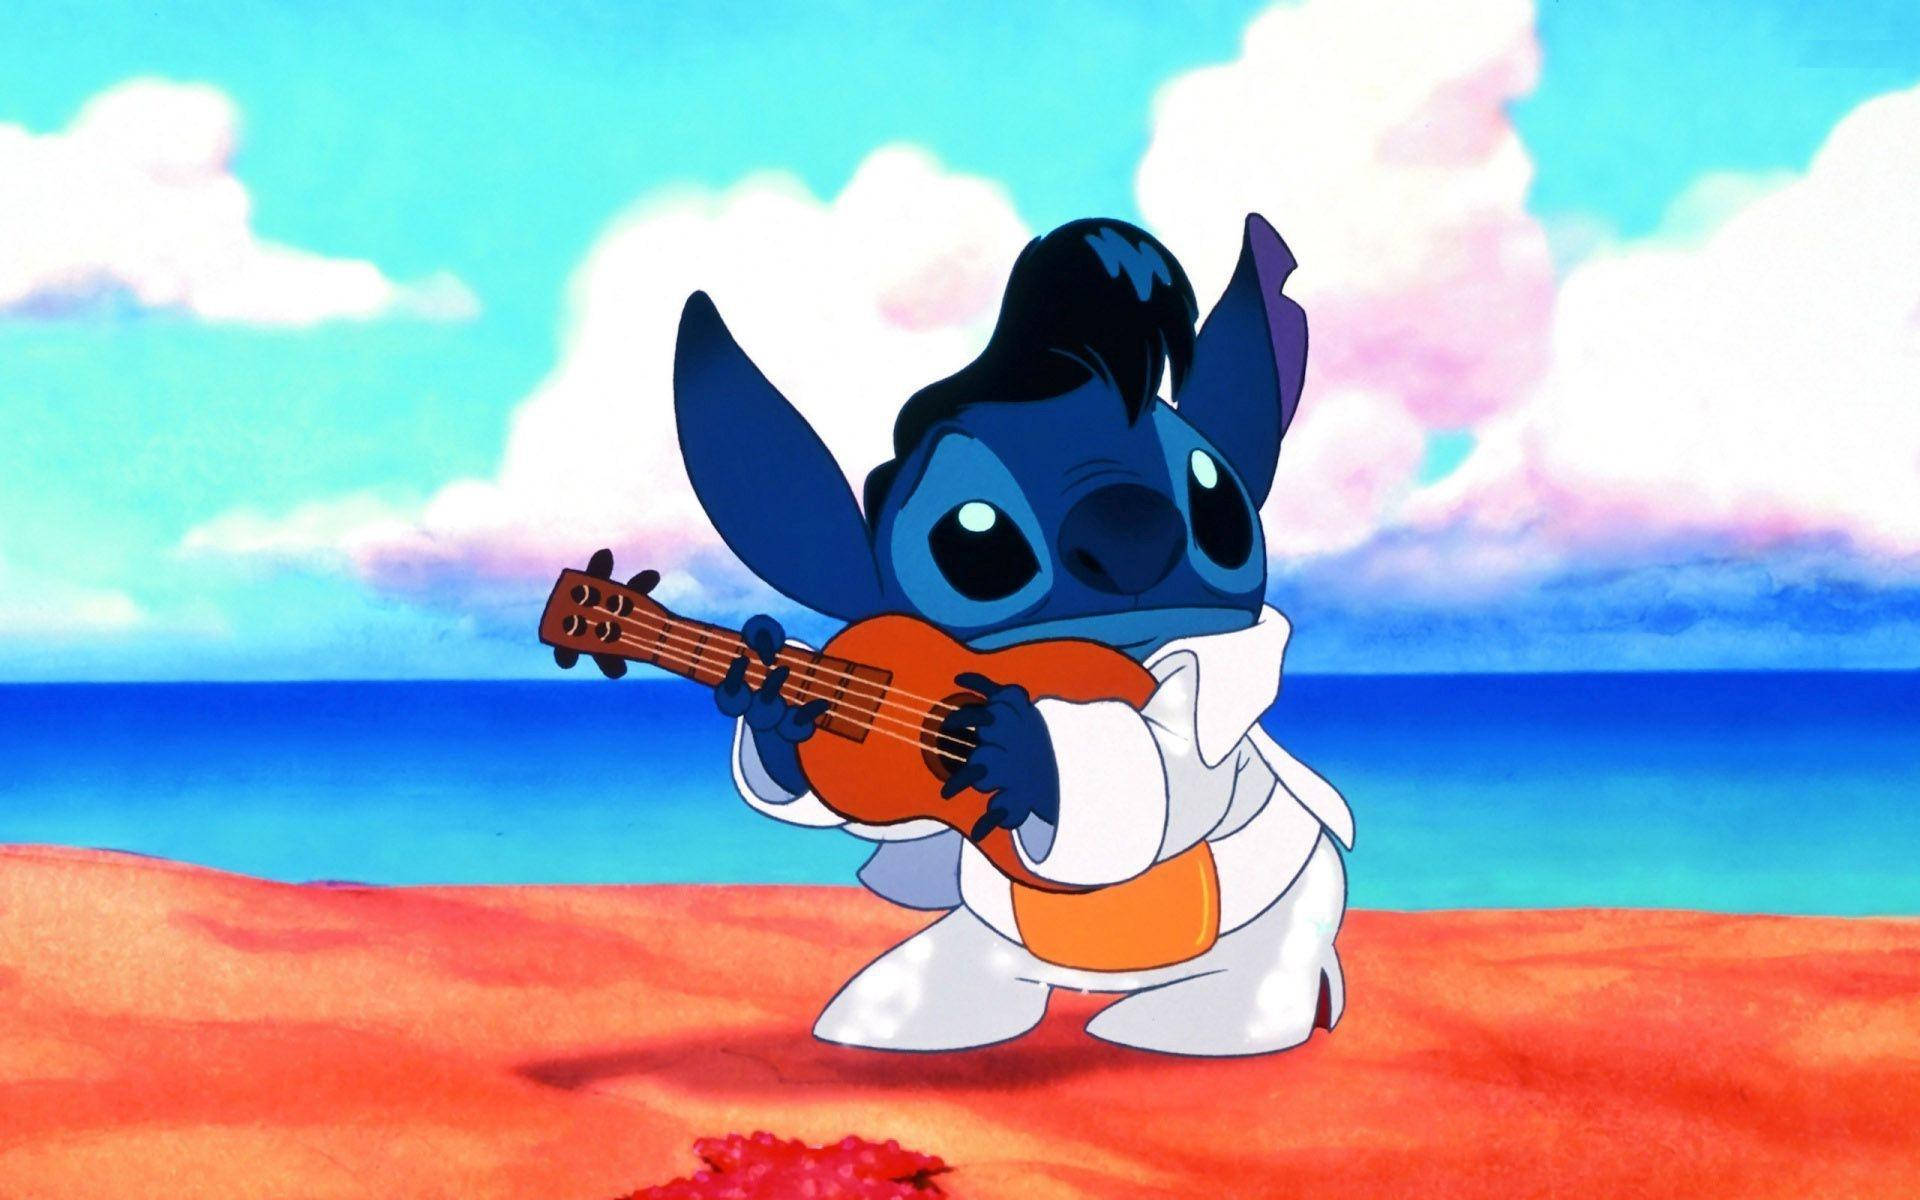 Download Cute Aesthetic Stitch With Guitar Wallpaper 